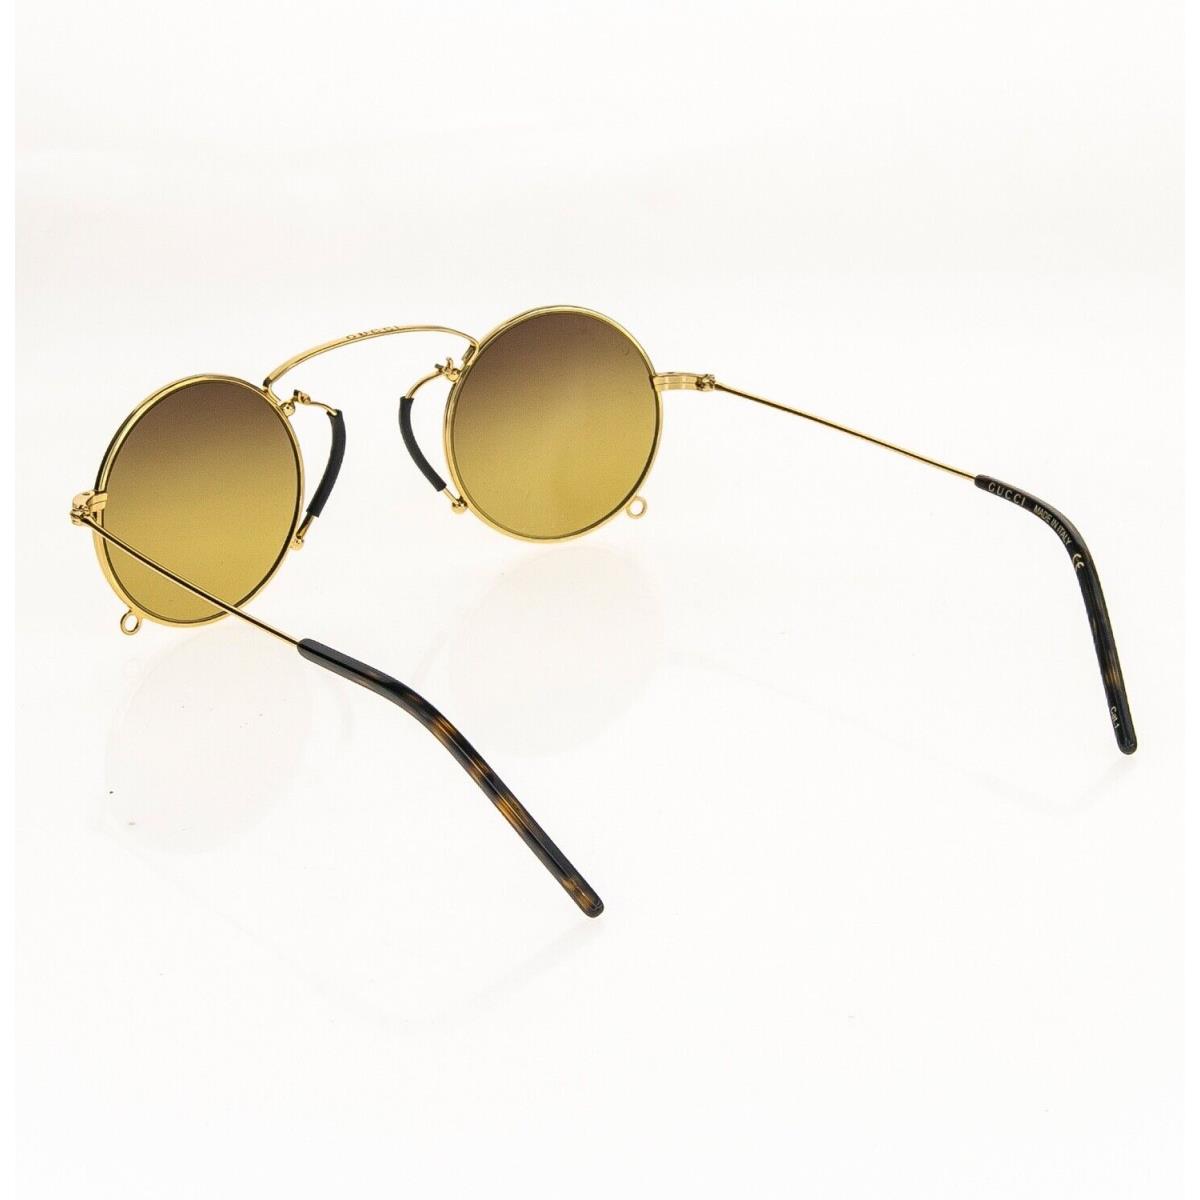 Gucci sunglasses  - 003 , Gold Frame, Brown Lens 1